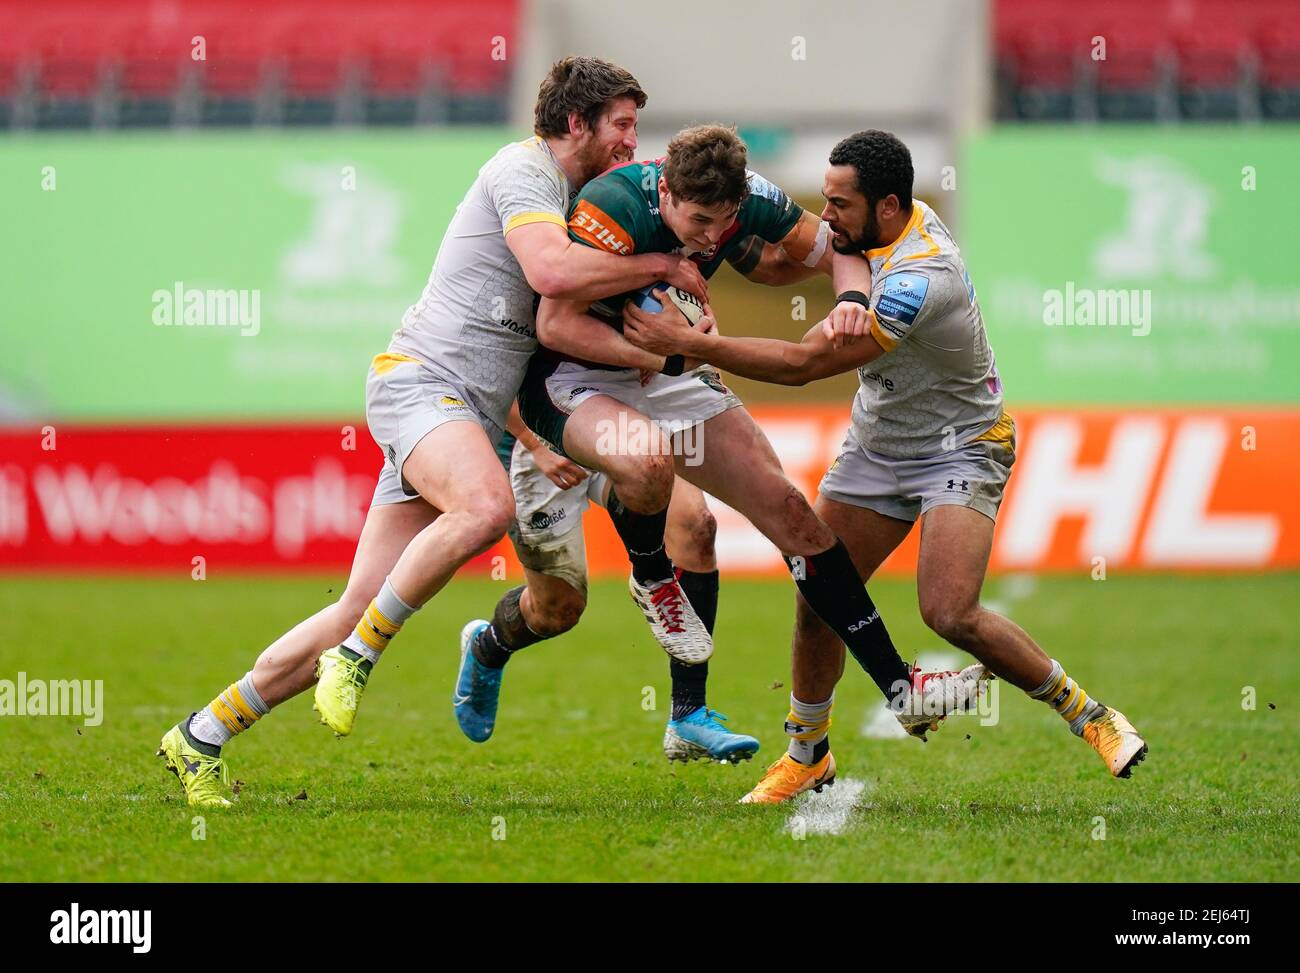 Wasps Centre Michaël Le Bourgeois and Winger Zach Kibirige combine to tackle Leicester Tigers full-back Freddie Steward during a Gallagher Premiership Stock Photo